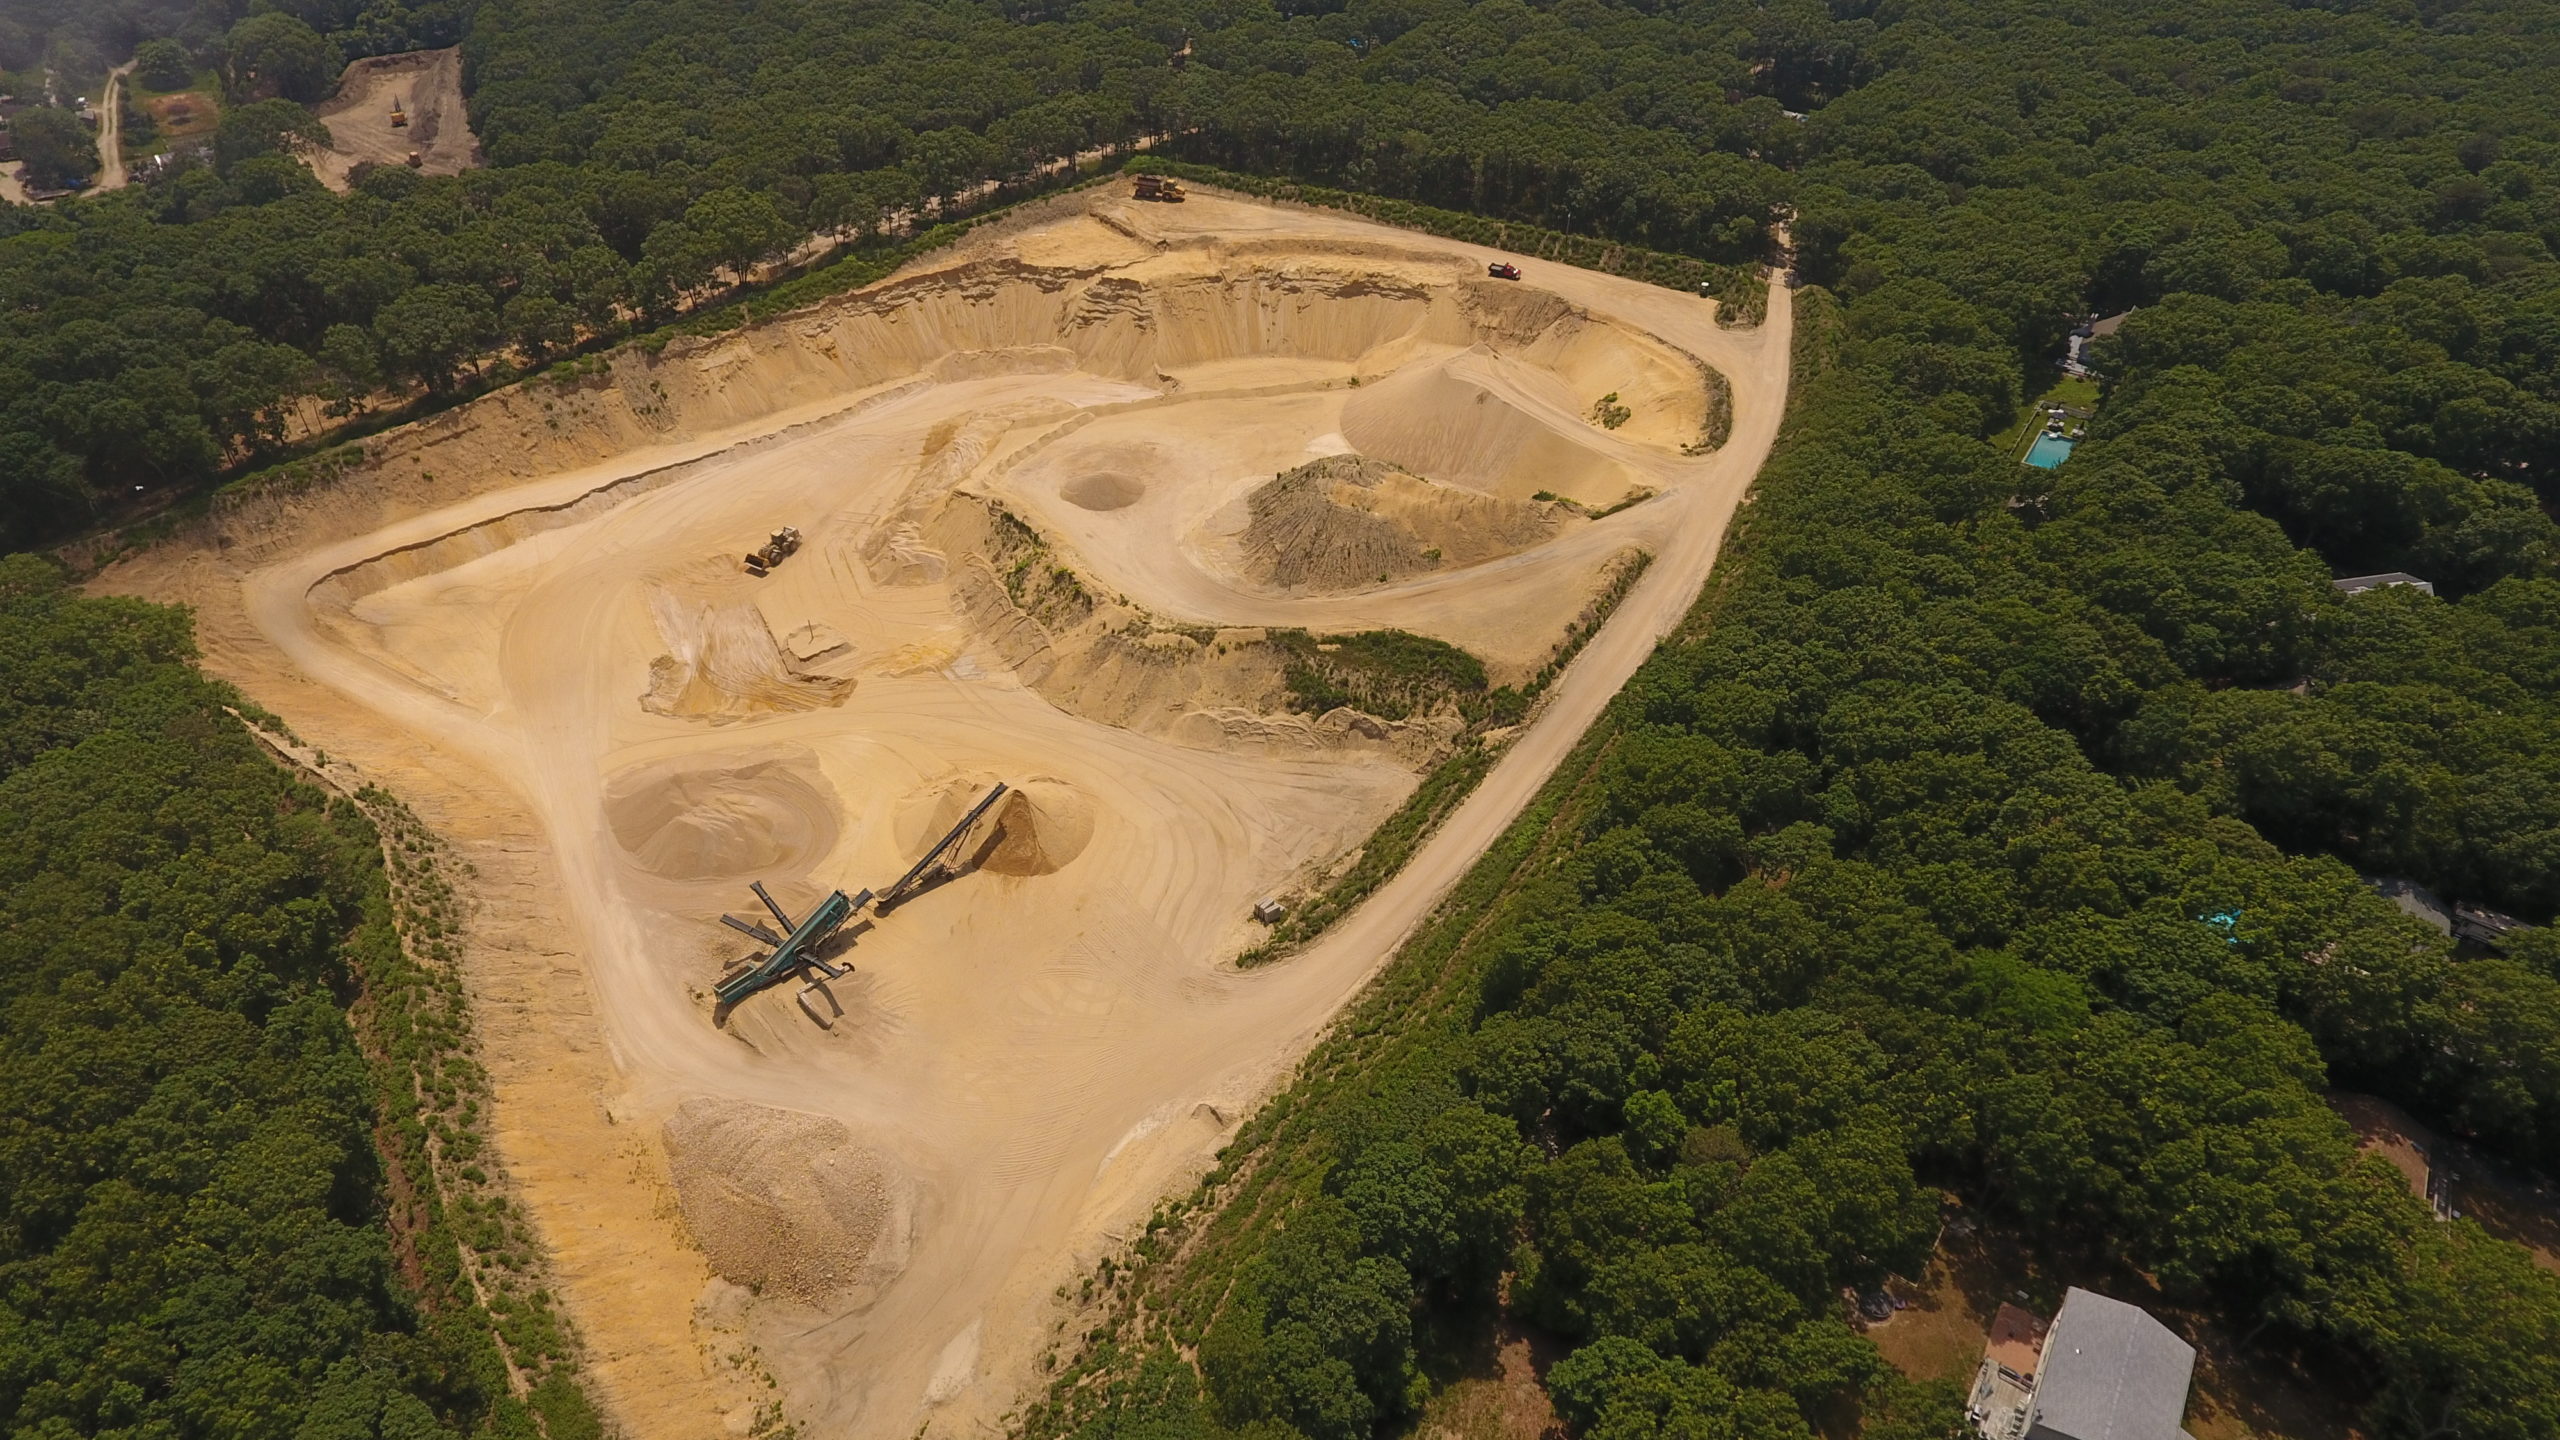 The sand pit on Middle Highway in East Hampton known as Sand Highway. A state judge this week ruled that allowing the mine to dig down 150 feet, creating a 6-acre lake of exposed groundwater, does not constitute an expansion of the mine. But another state court ruled in May that a similar proposal in Noyac was, in fact, an illegal expansion.